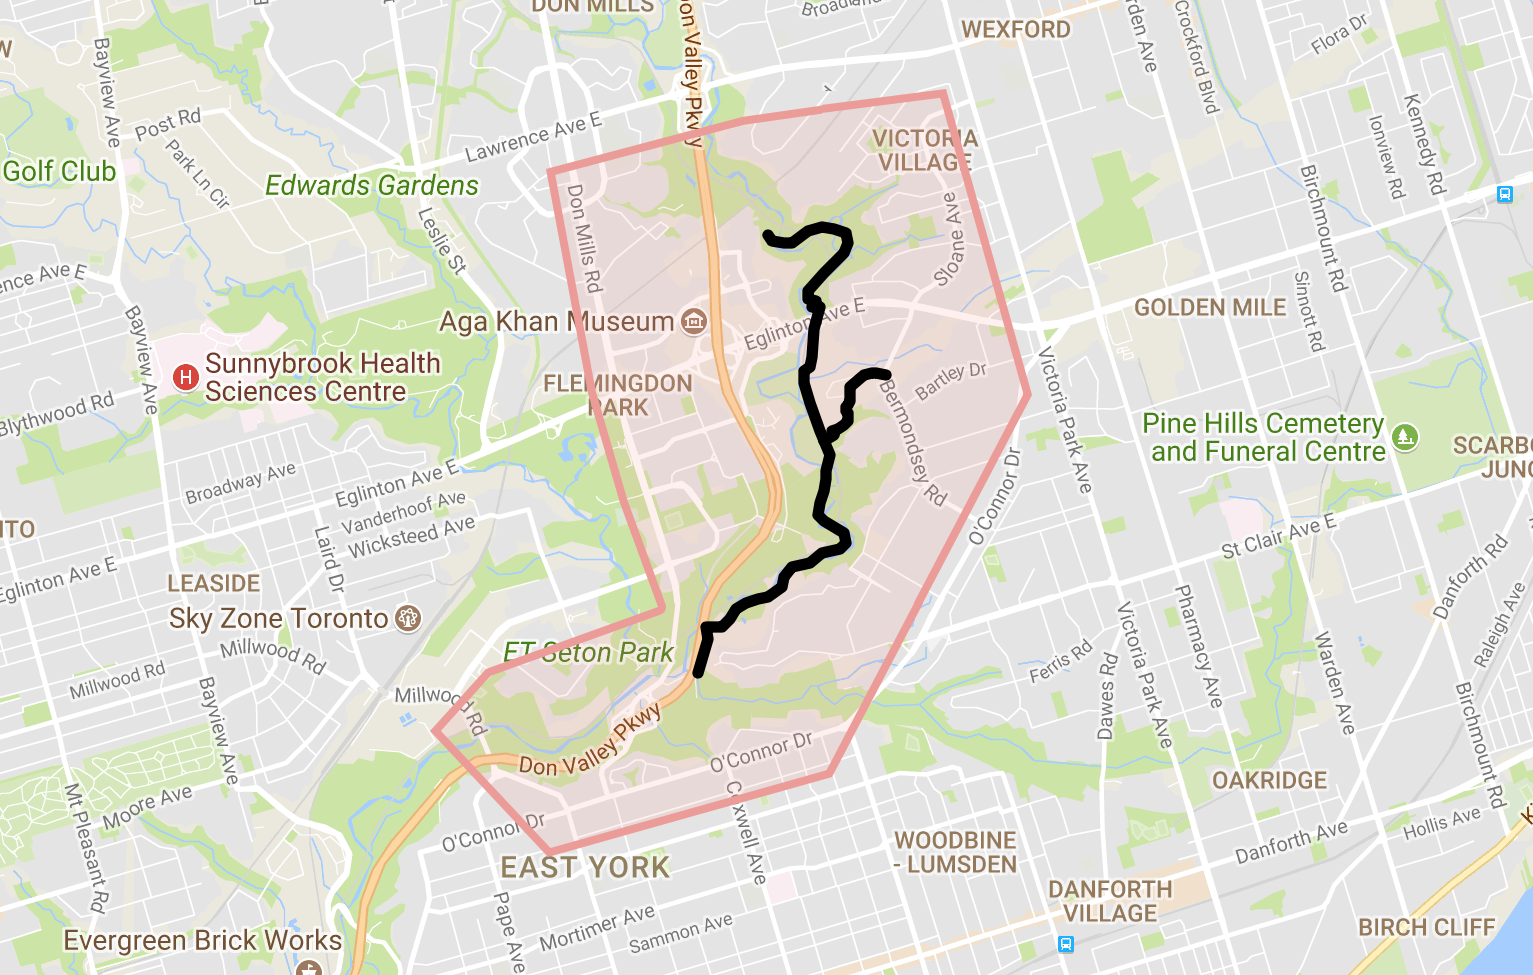 Map of East Don Trail Study Area showing the proposed trail alignment along the Don River from north of Eglinton Avenue southbound to Coxwell Ravine Park.